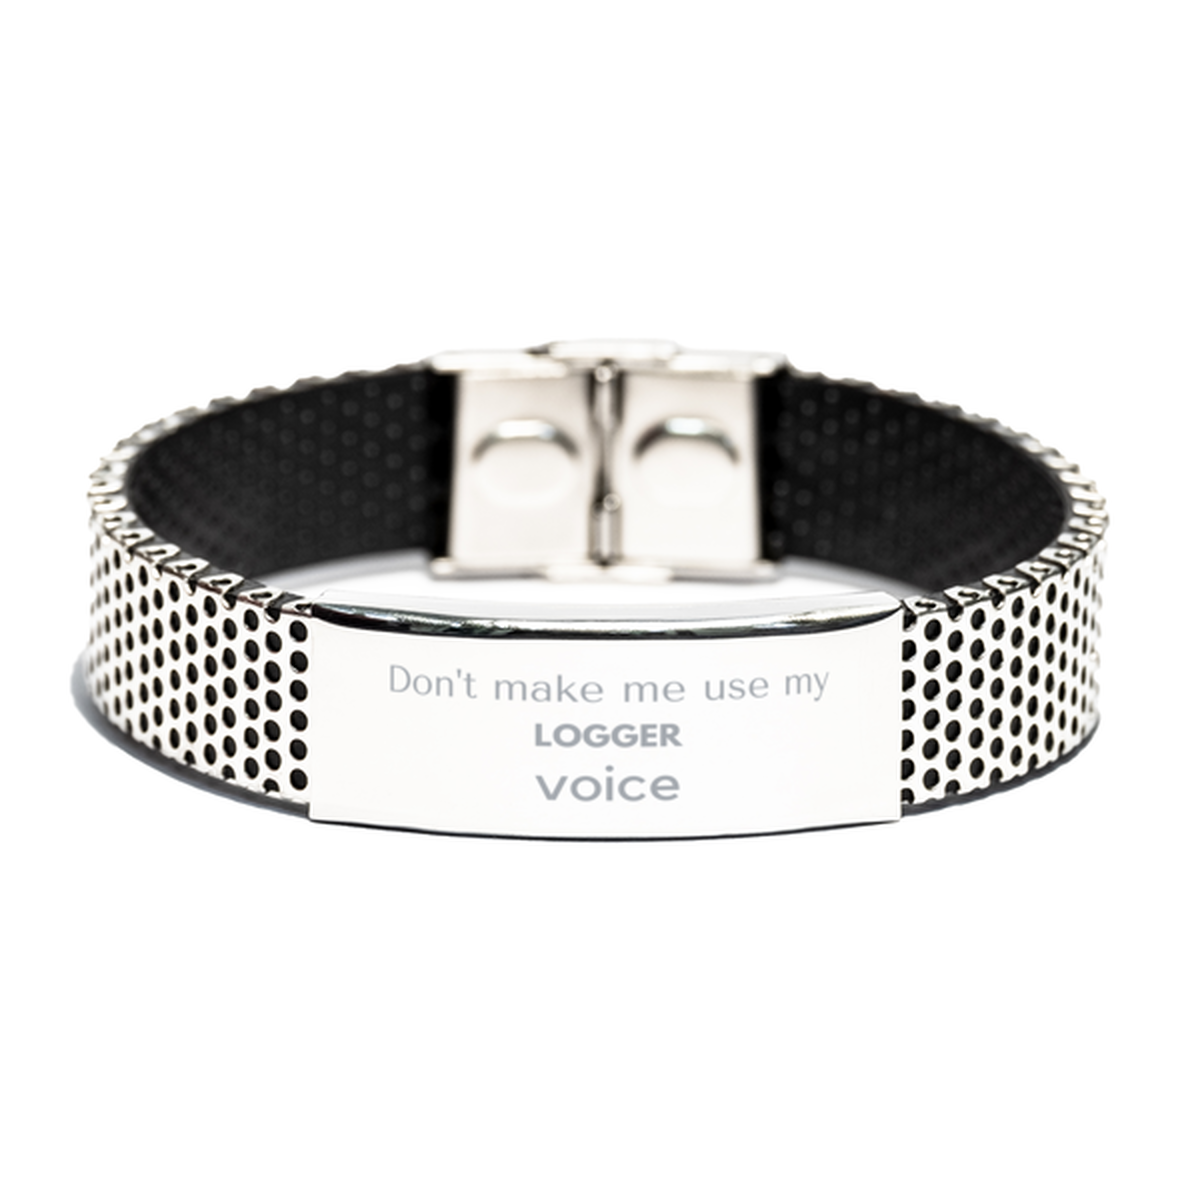 Don't make me use my Logger voice, Sarcasm Logger Gifts, Christmas Logger Stainless Steel Bracelet Birthday Unique Gifts For Logger Coworkers, Men, Women, Colleague, Friends